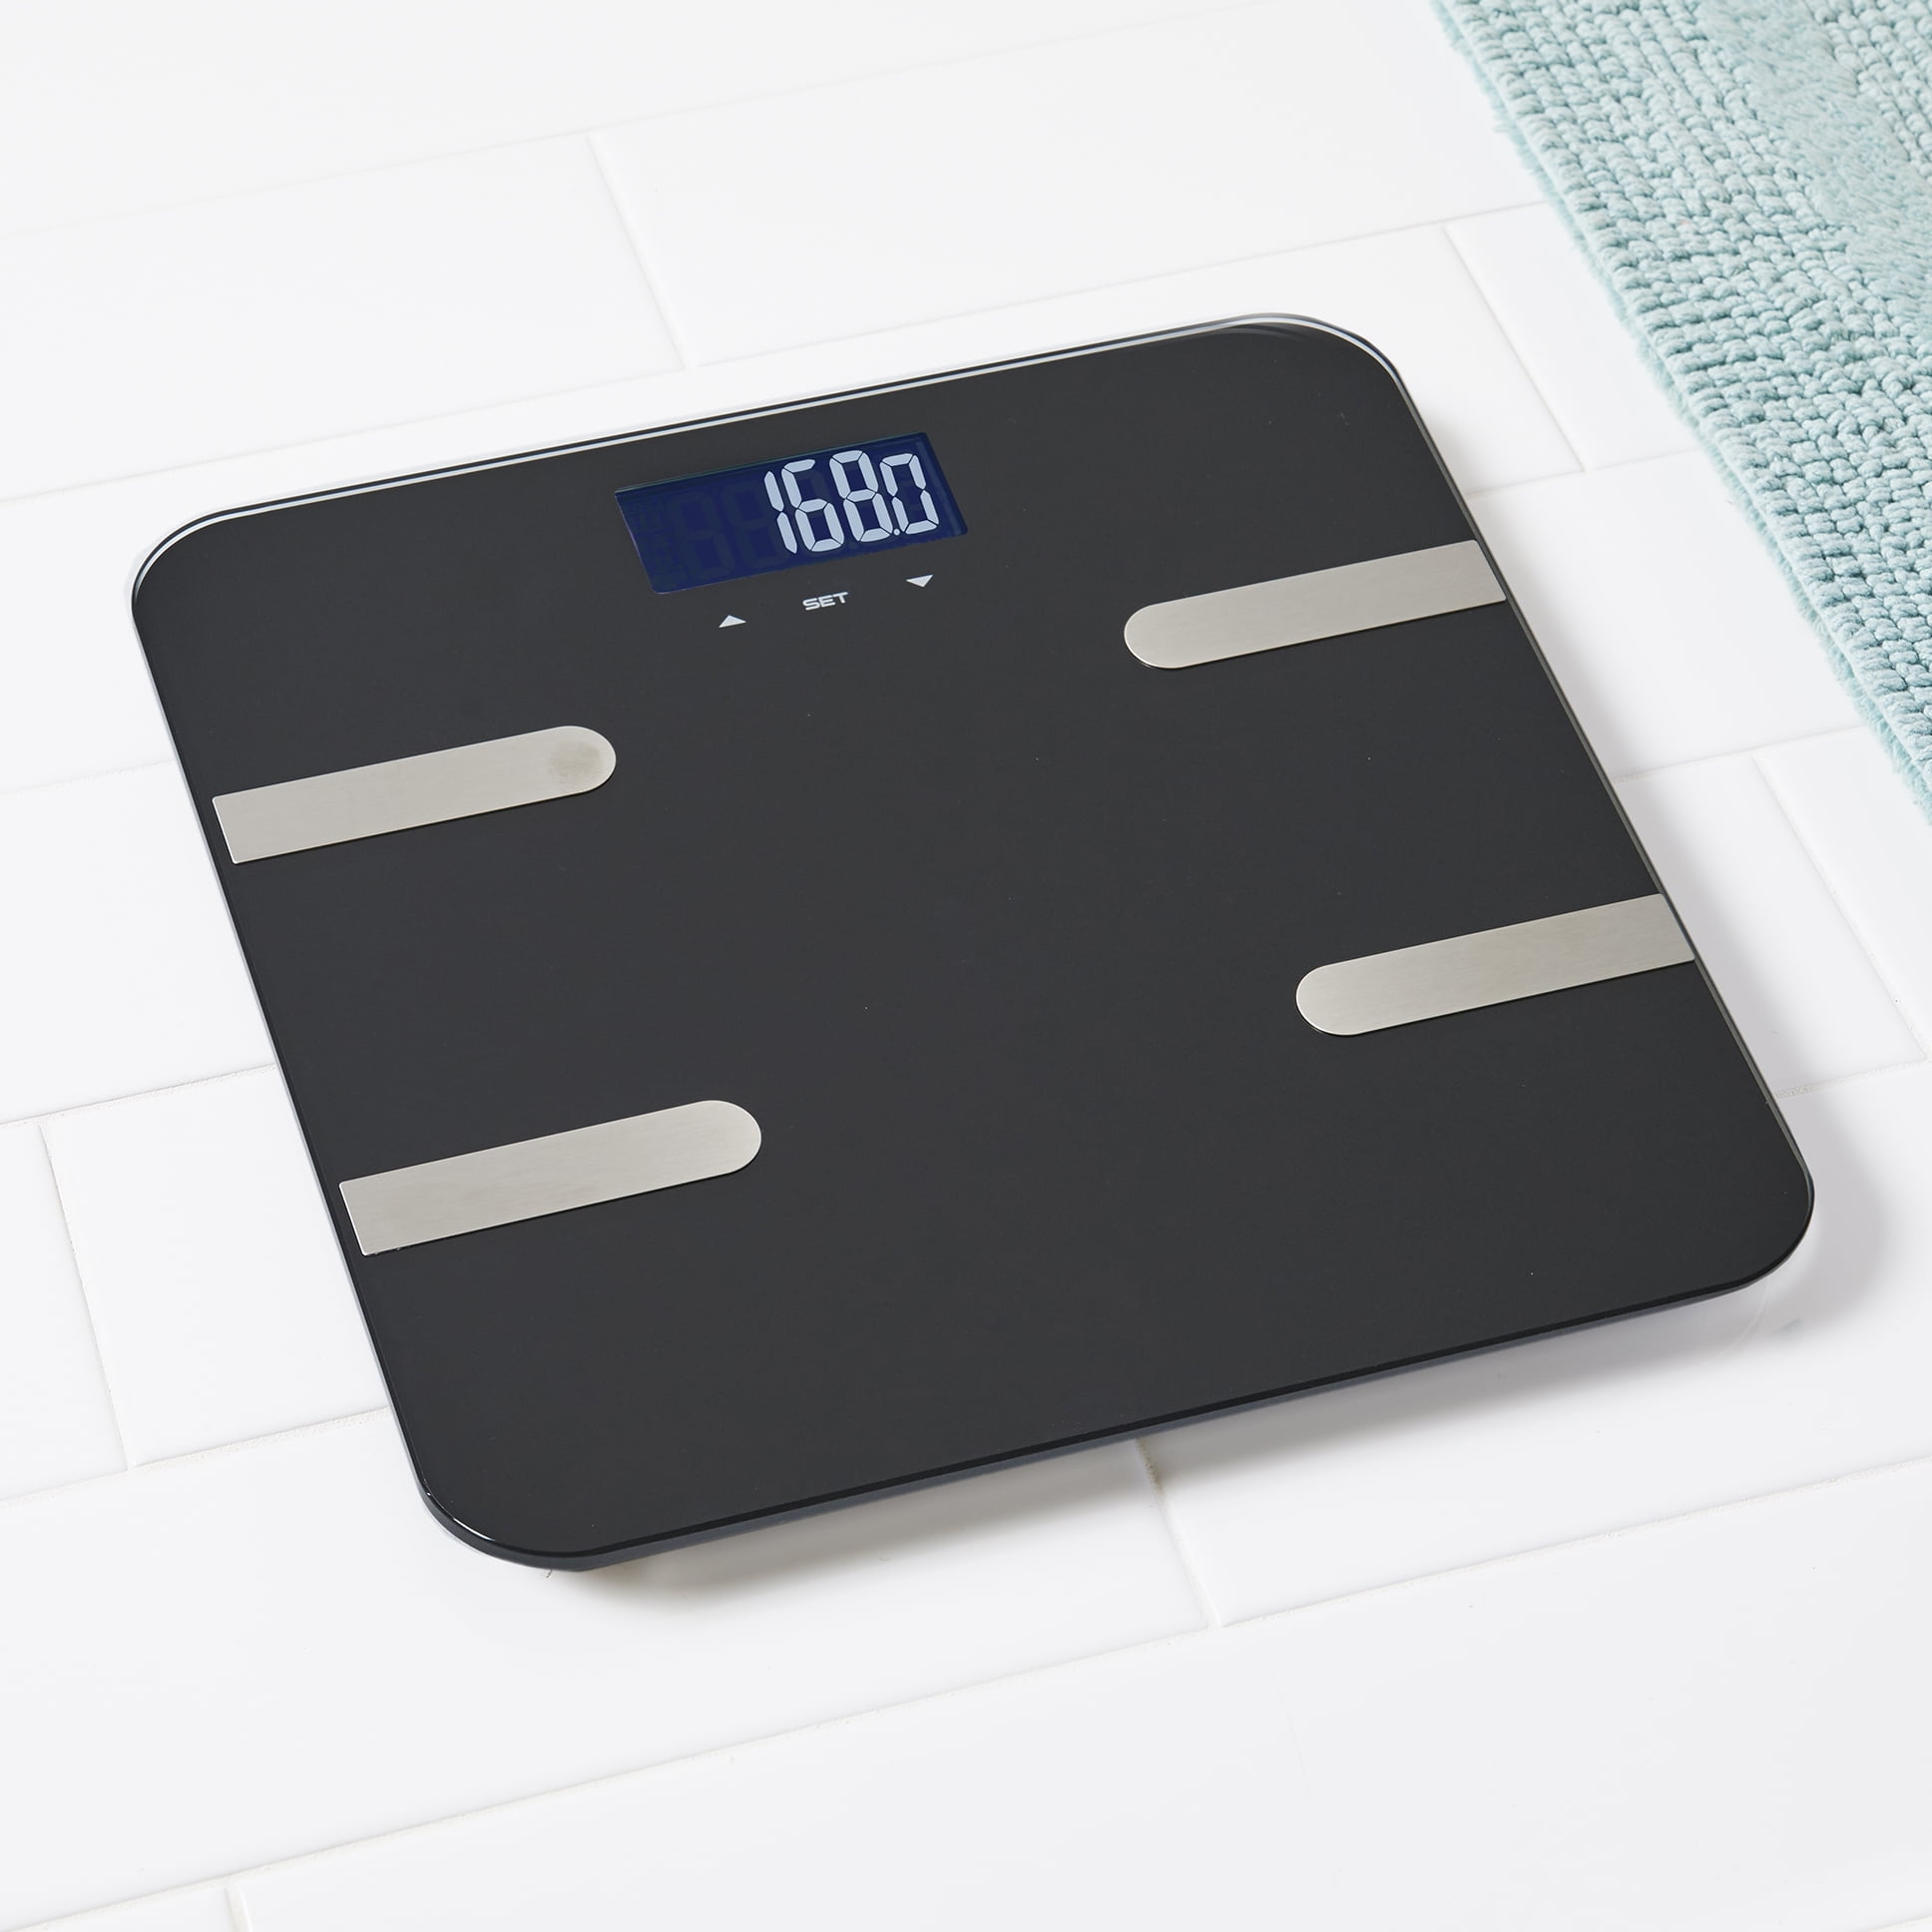 Digital Weight Scale Precision Household Health Body Instrument for Adults  Small Cute Female Weighing Electronic